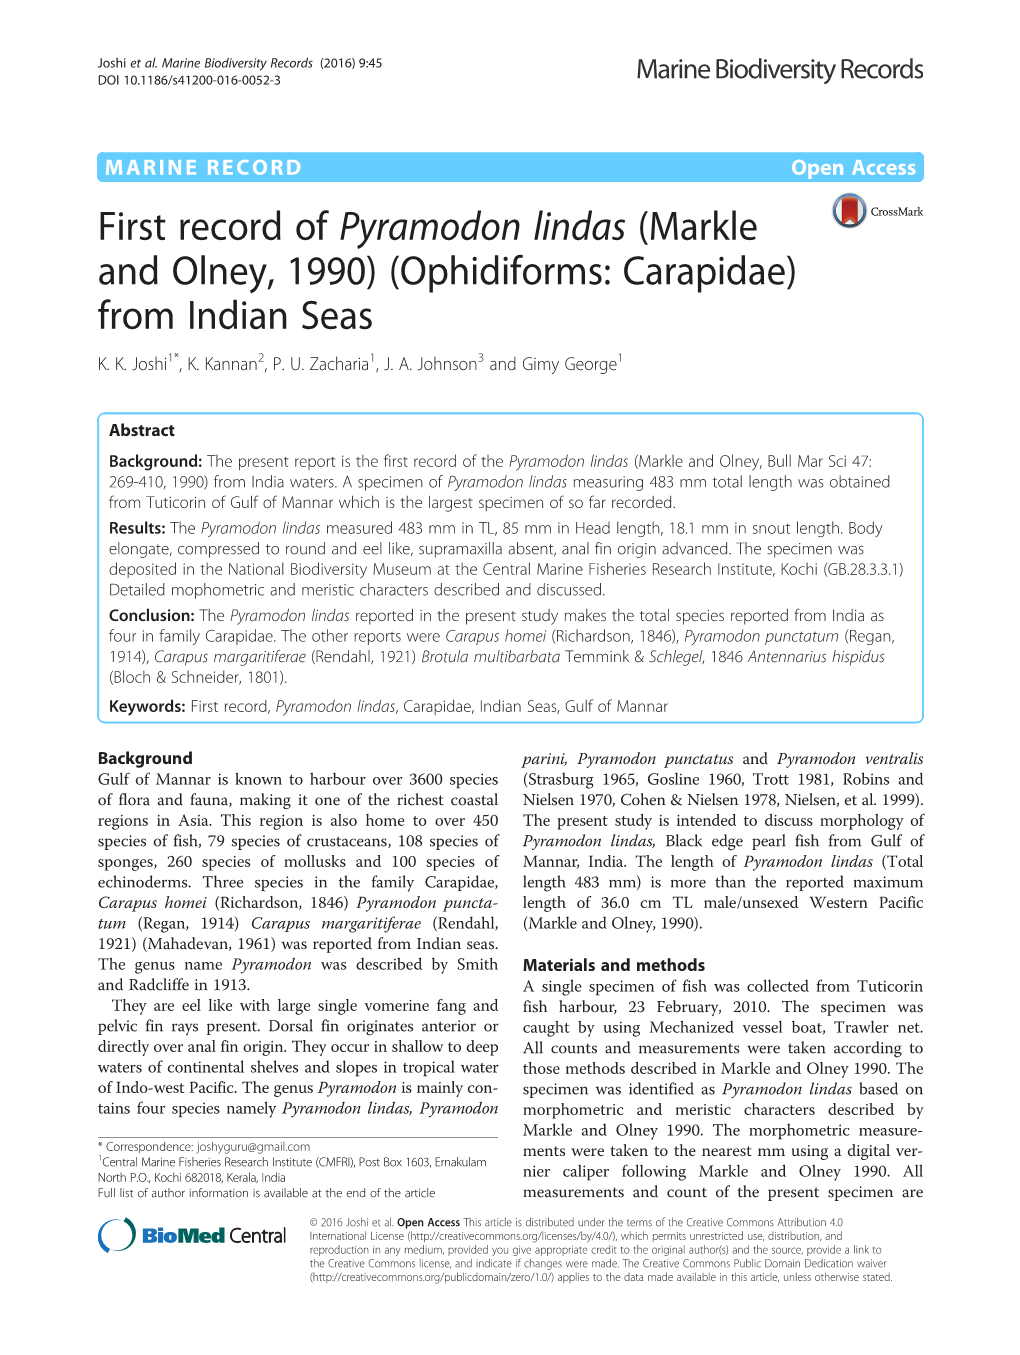 First Record of Pyramodon Lindas (Markle and Olney, 1990) (Ophidiforms: Carapidae) from Indian Seas K